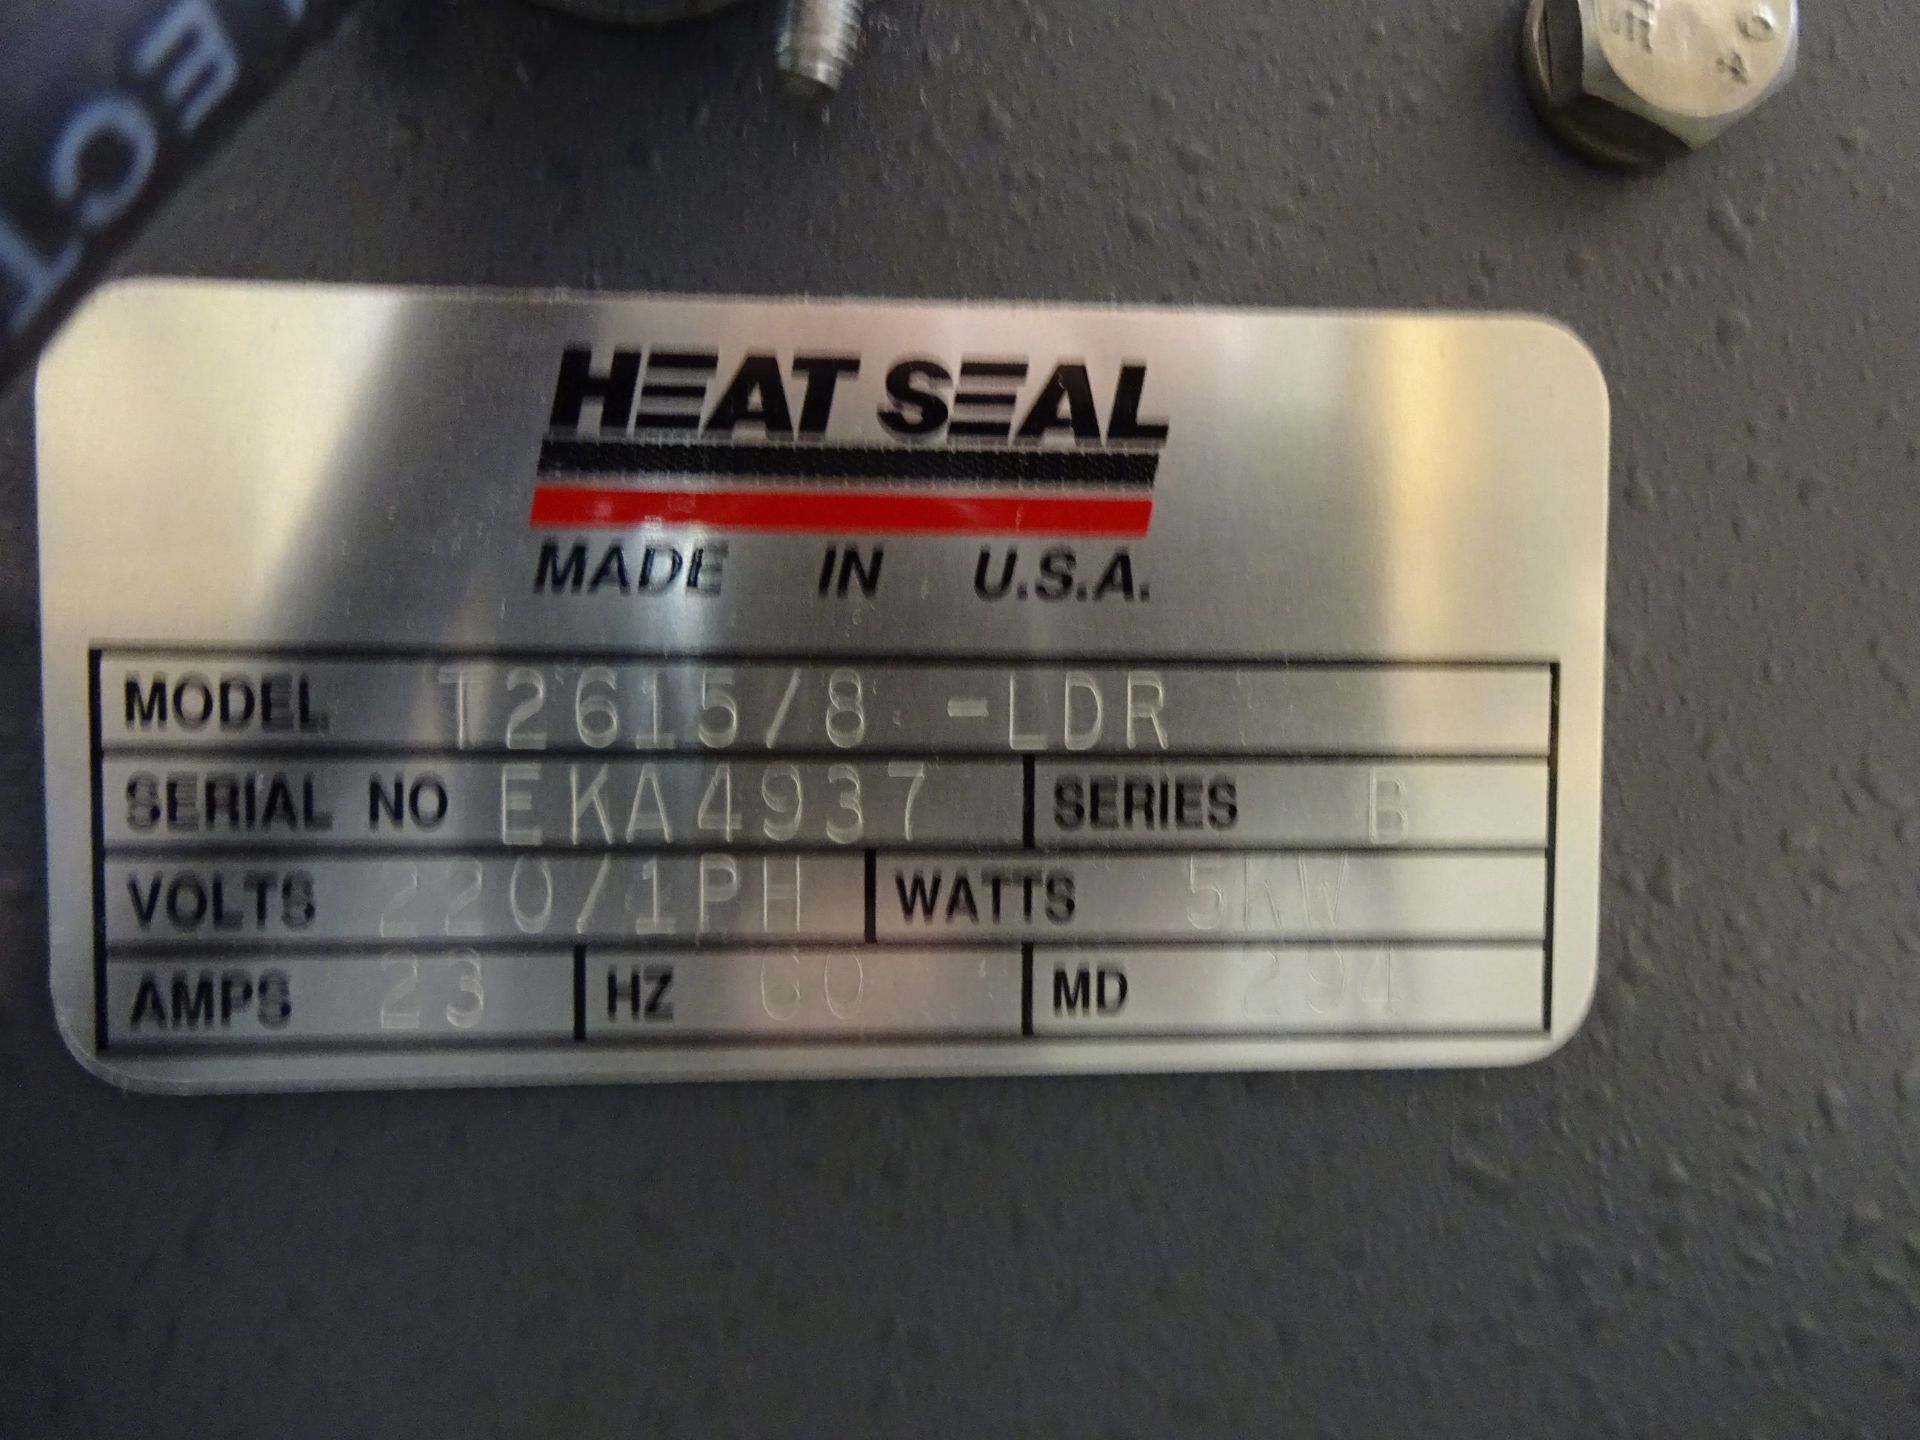 15" X 20" HEAT SEAL MODEL HS-1520 "L-BAR" SEALER; S/N EIA4920 WITH 26" LONG X 15" WIDE X 8" HIGH - Image 6 of 8